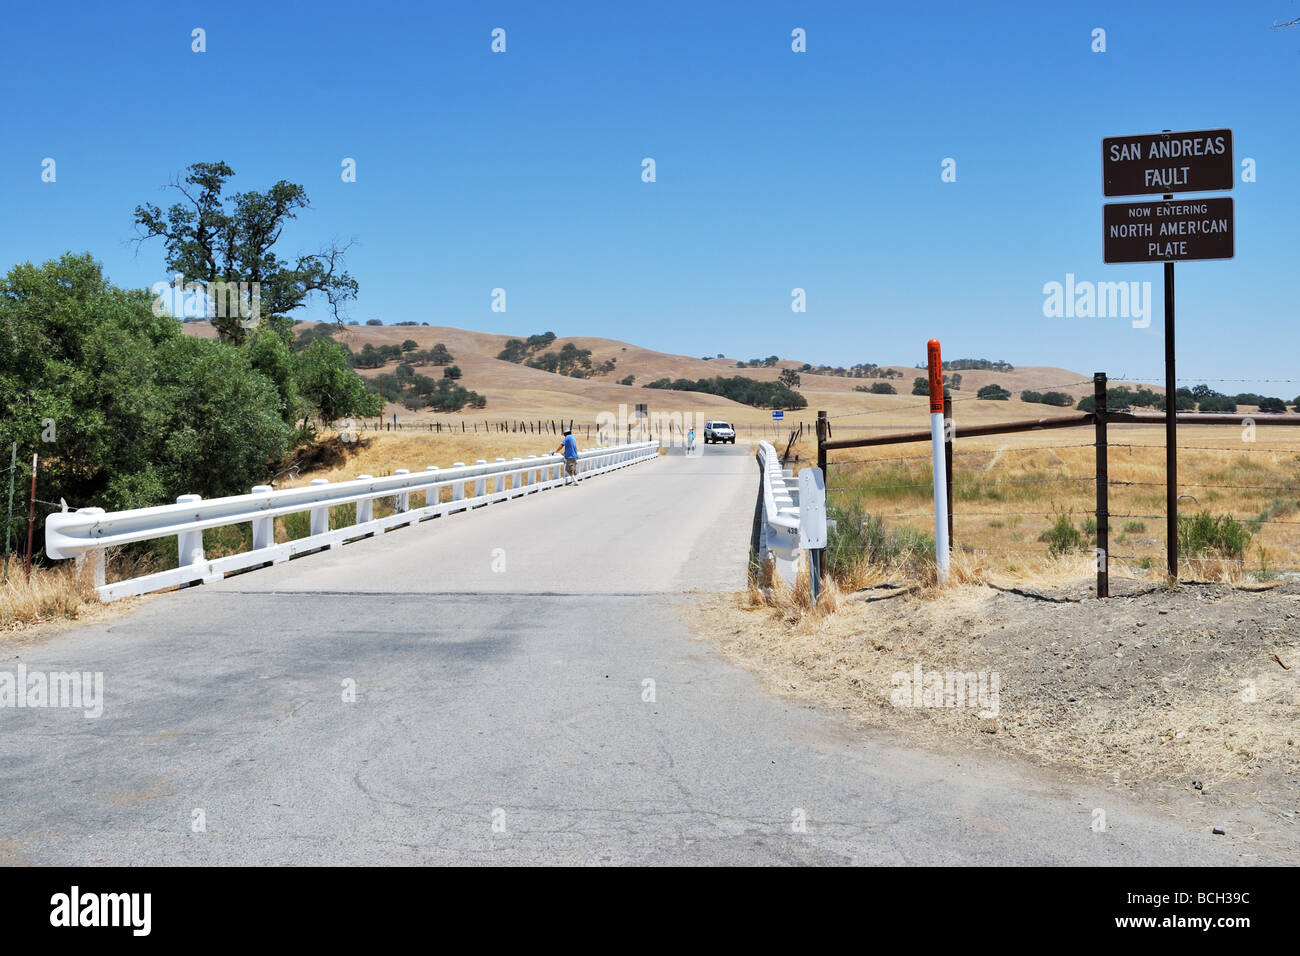 This bridge near Parkfield, CA, crosses the San Andreas fault.  The bridge is twisted from previous earthquakes and movement. Stock Photo